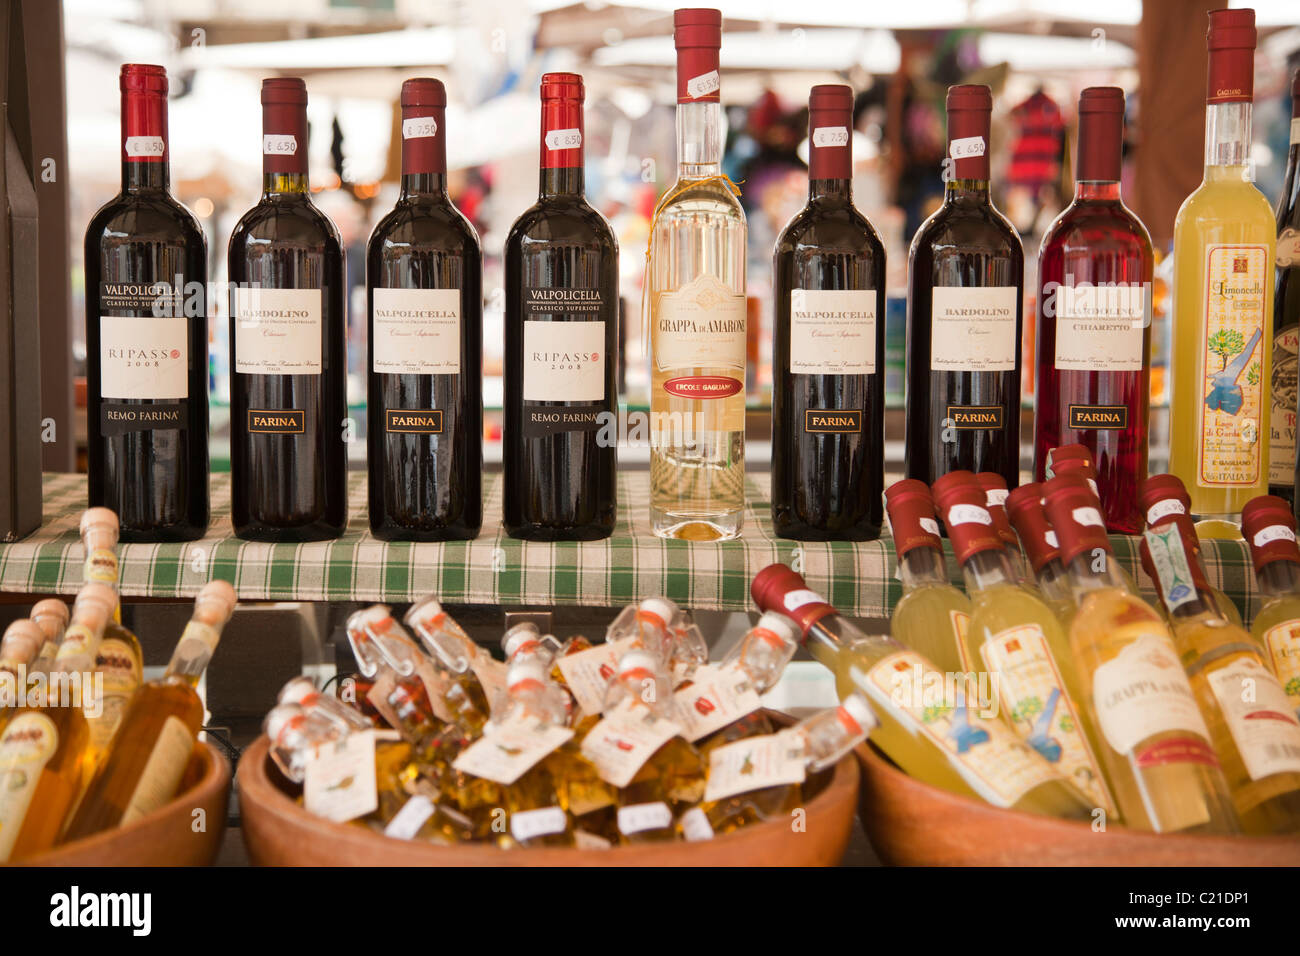 Bottles of wine at outdoor market in Padua Italy. Stock Photo